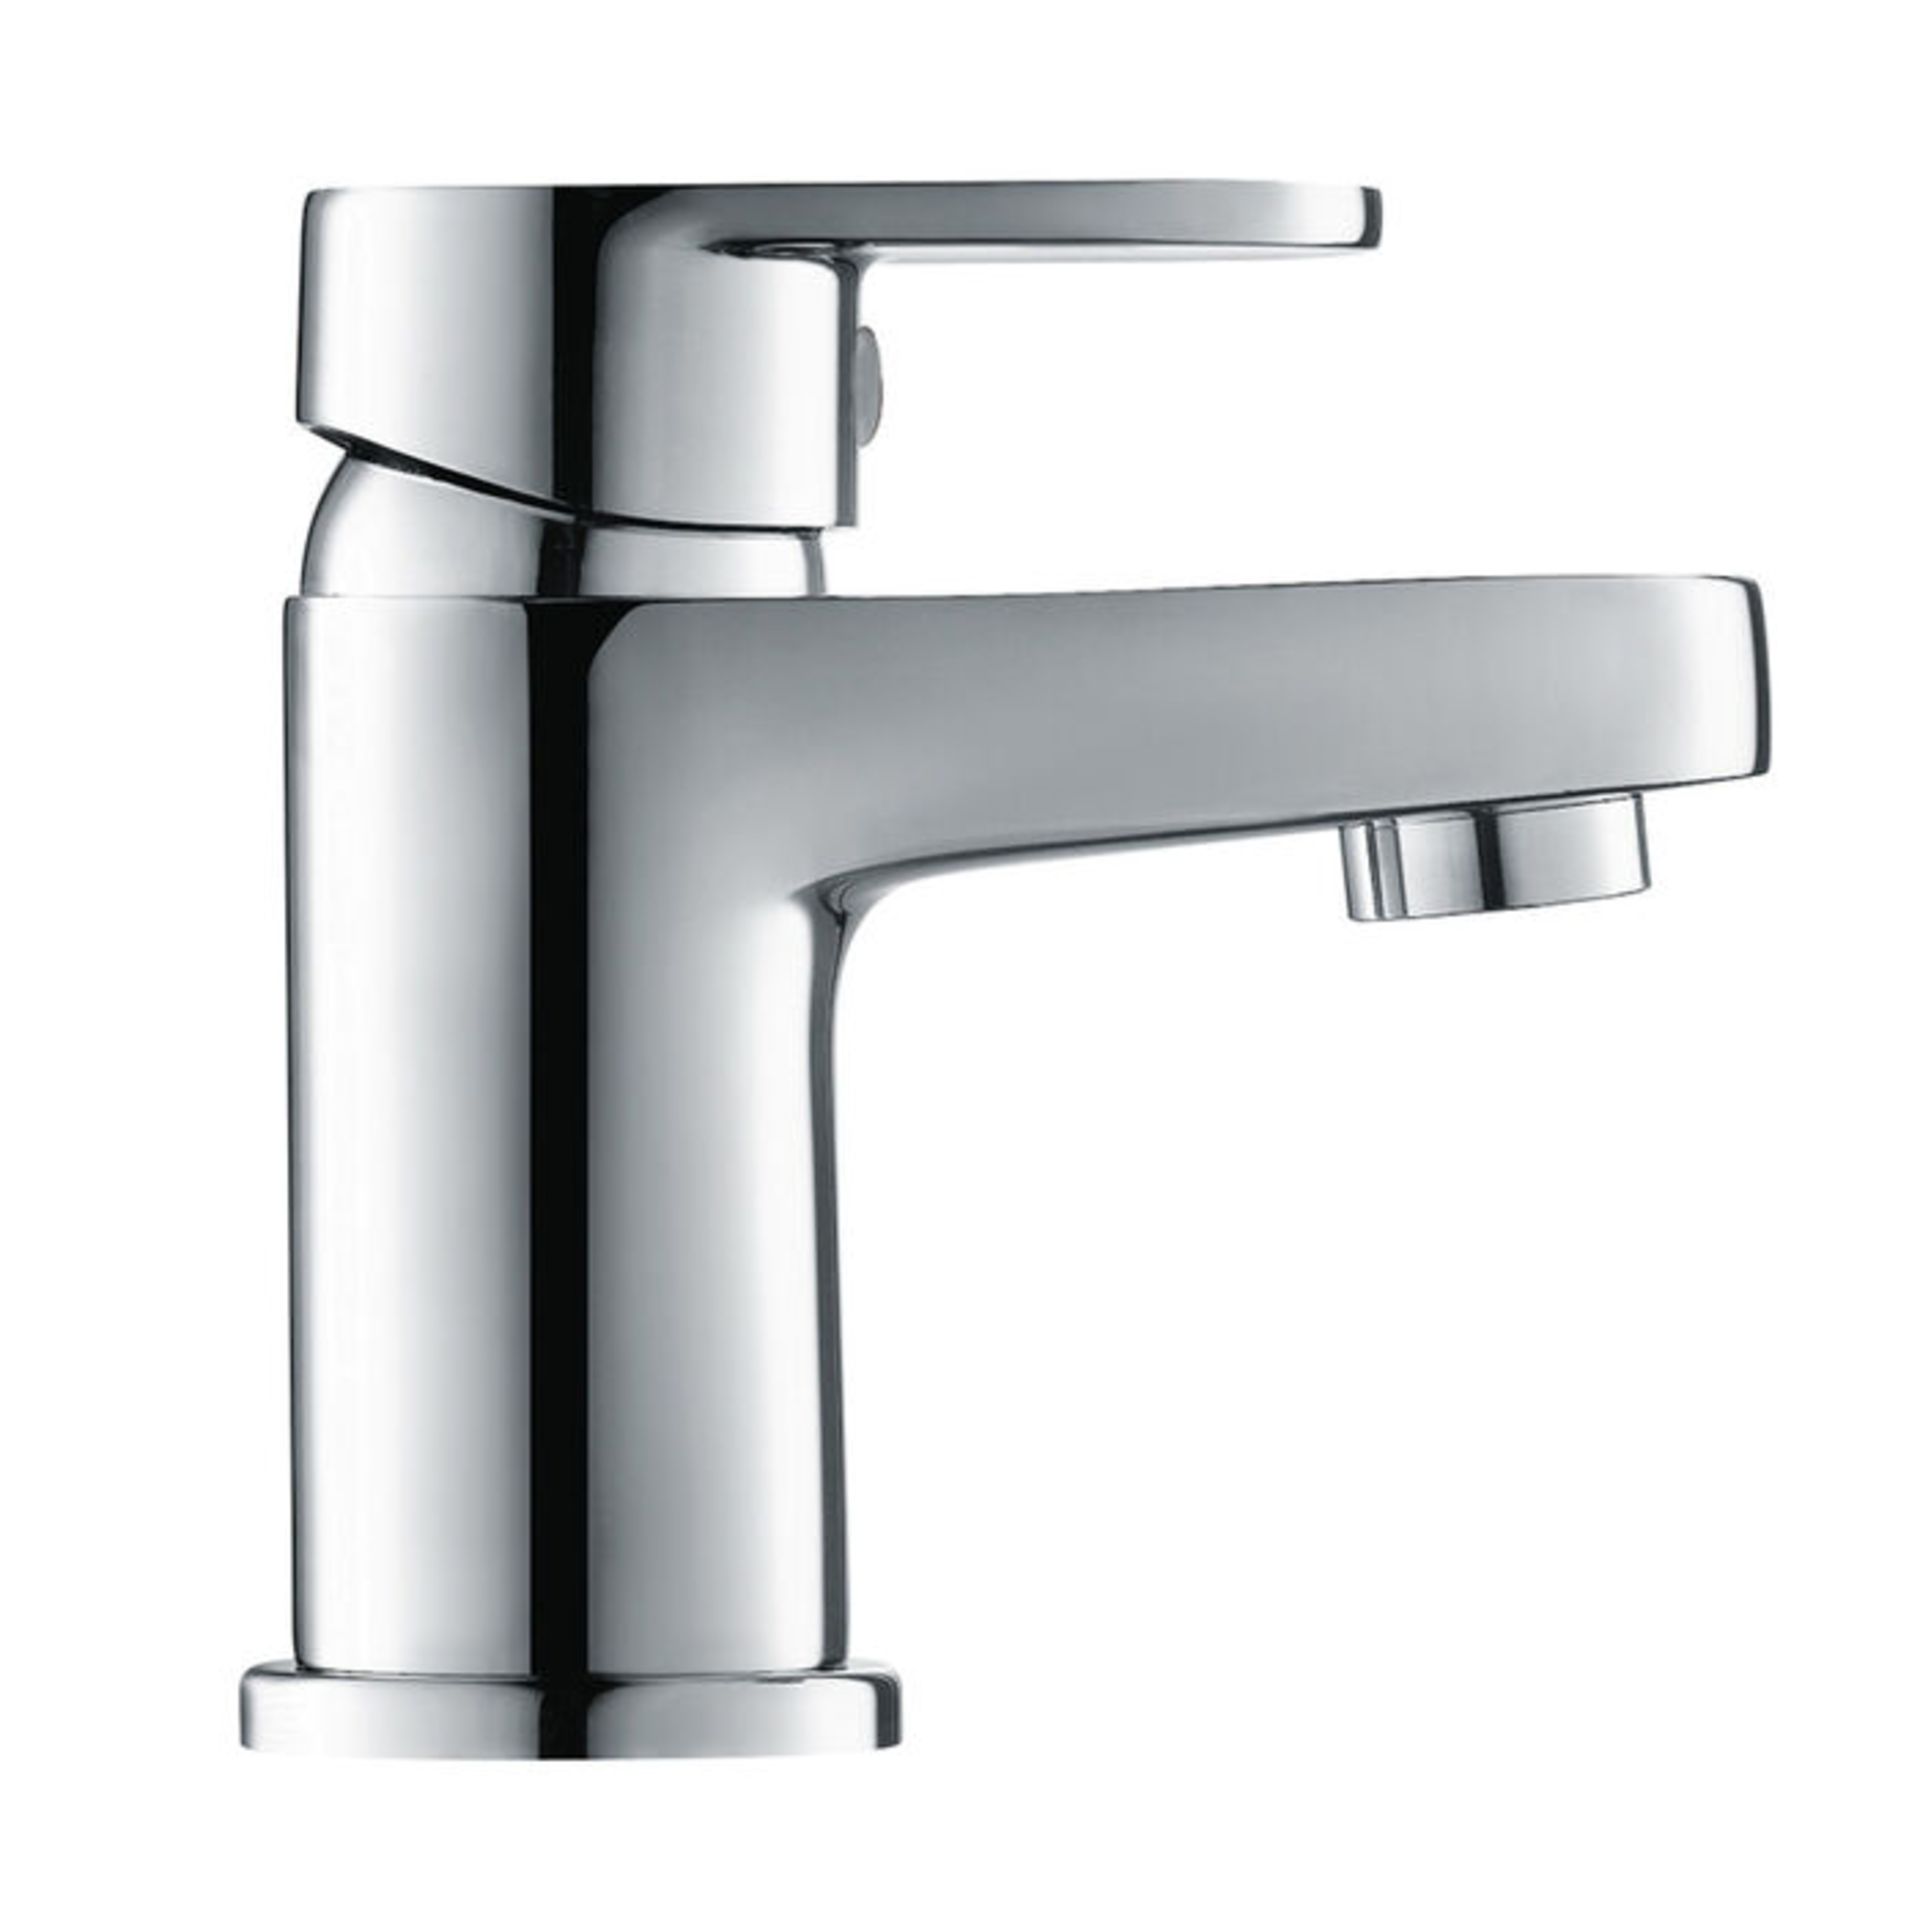 (RK1028) Boll Mono Sink Mixer Tap - Cloakroom Chrome Plated Solid Brass Mixer cartridge Mini... - Image 2 of 2